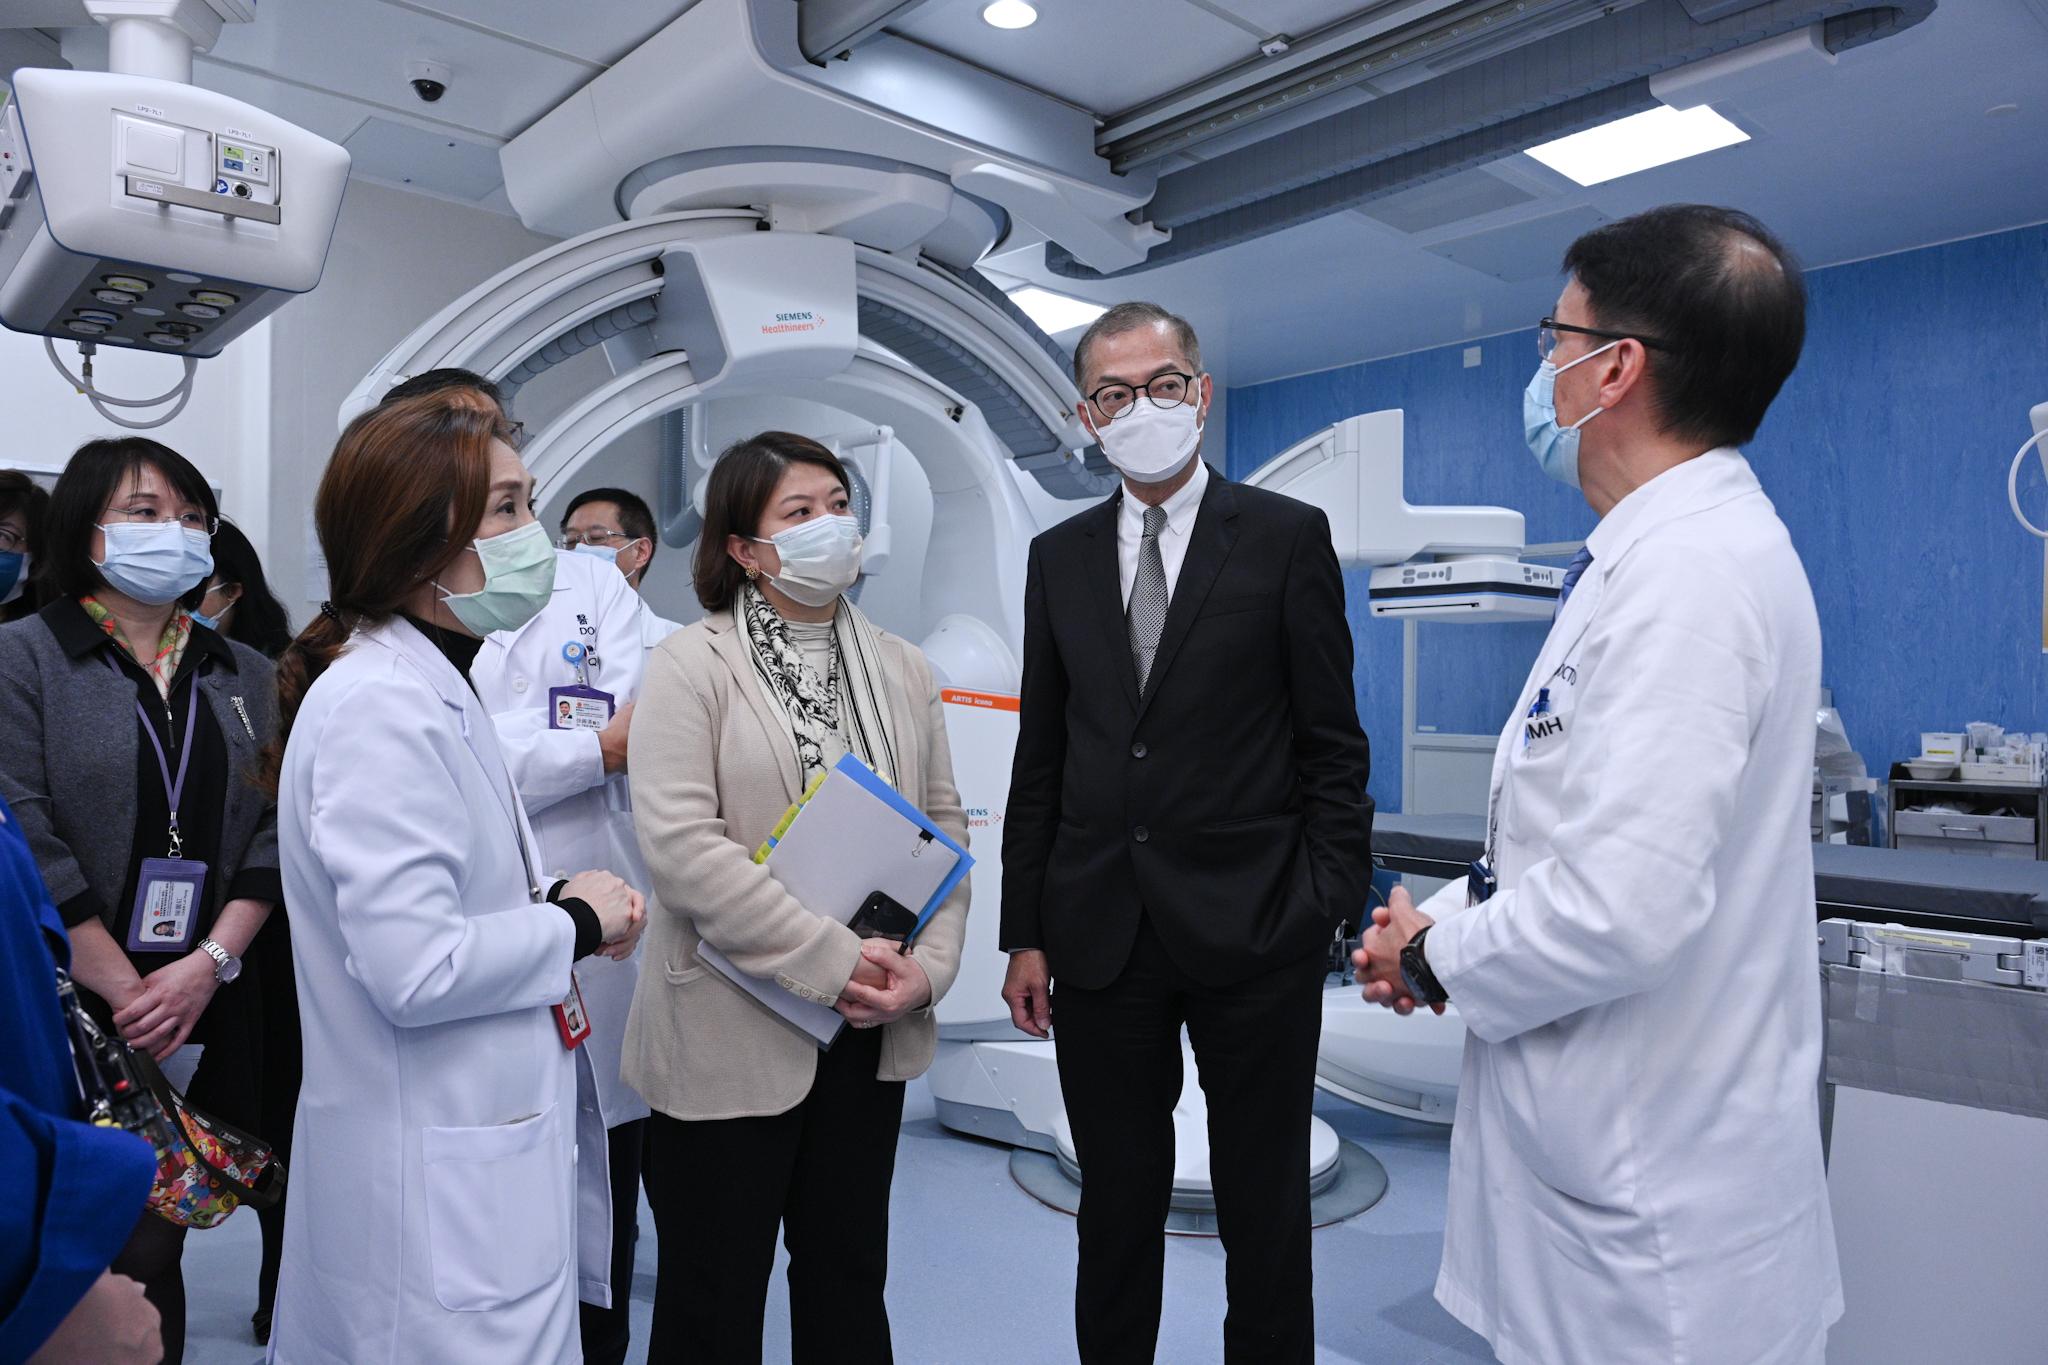 The Secretary for Health, Professor Lo Chung-mau, visited Queen Mary Hospital today (January 13). Photo shows Professor Lo (second right) and the Under Secretary for Health, Dr Libby Lee (third right), visiting the angiography suite of the hospital.